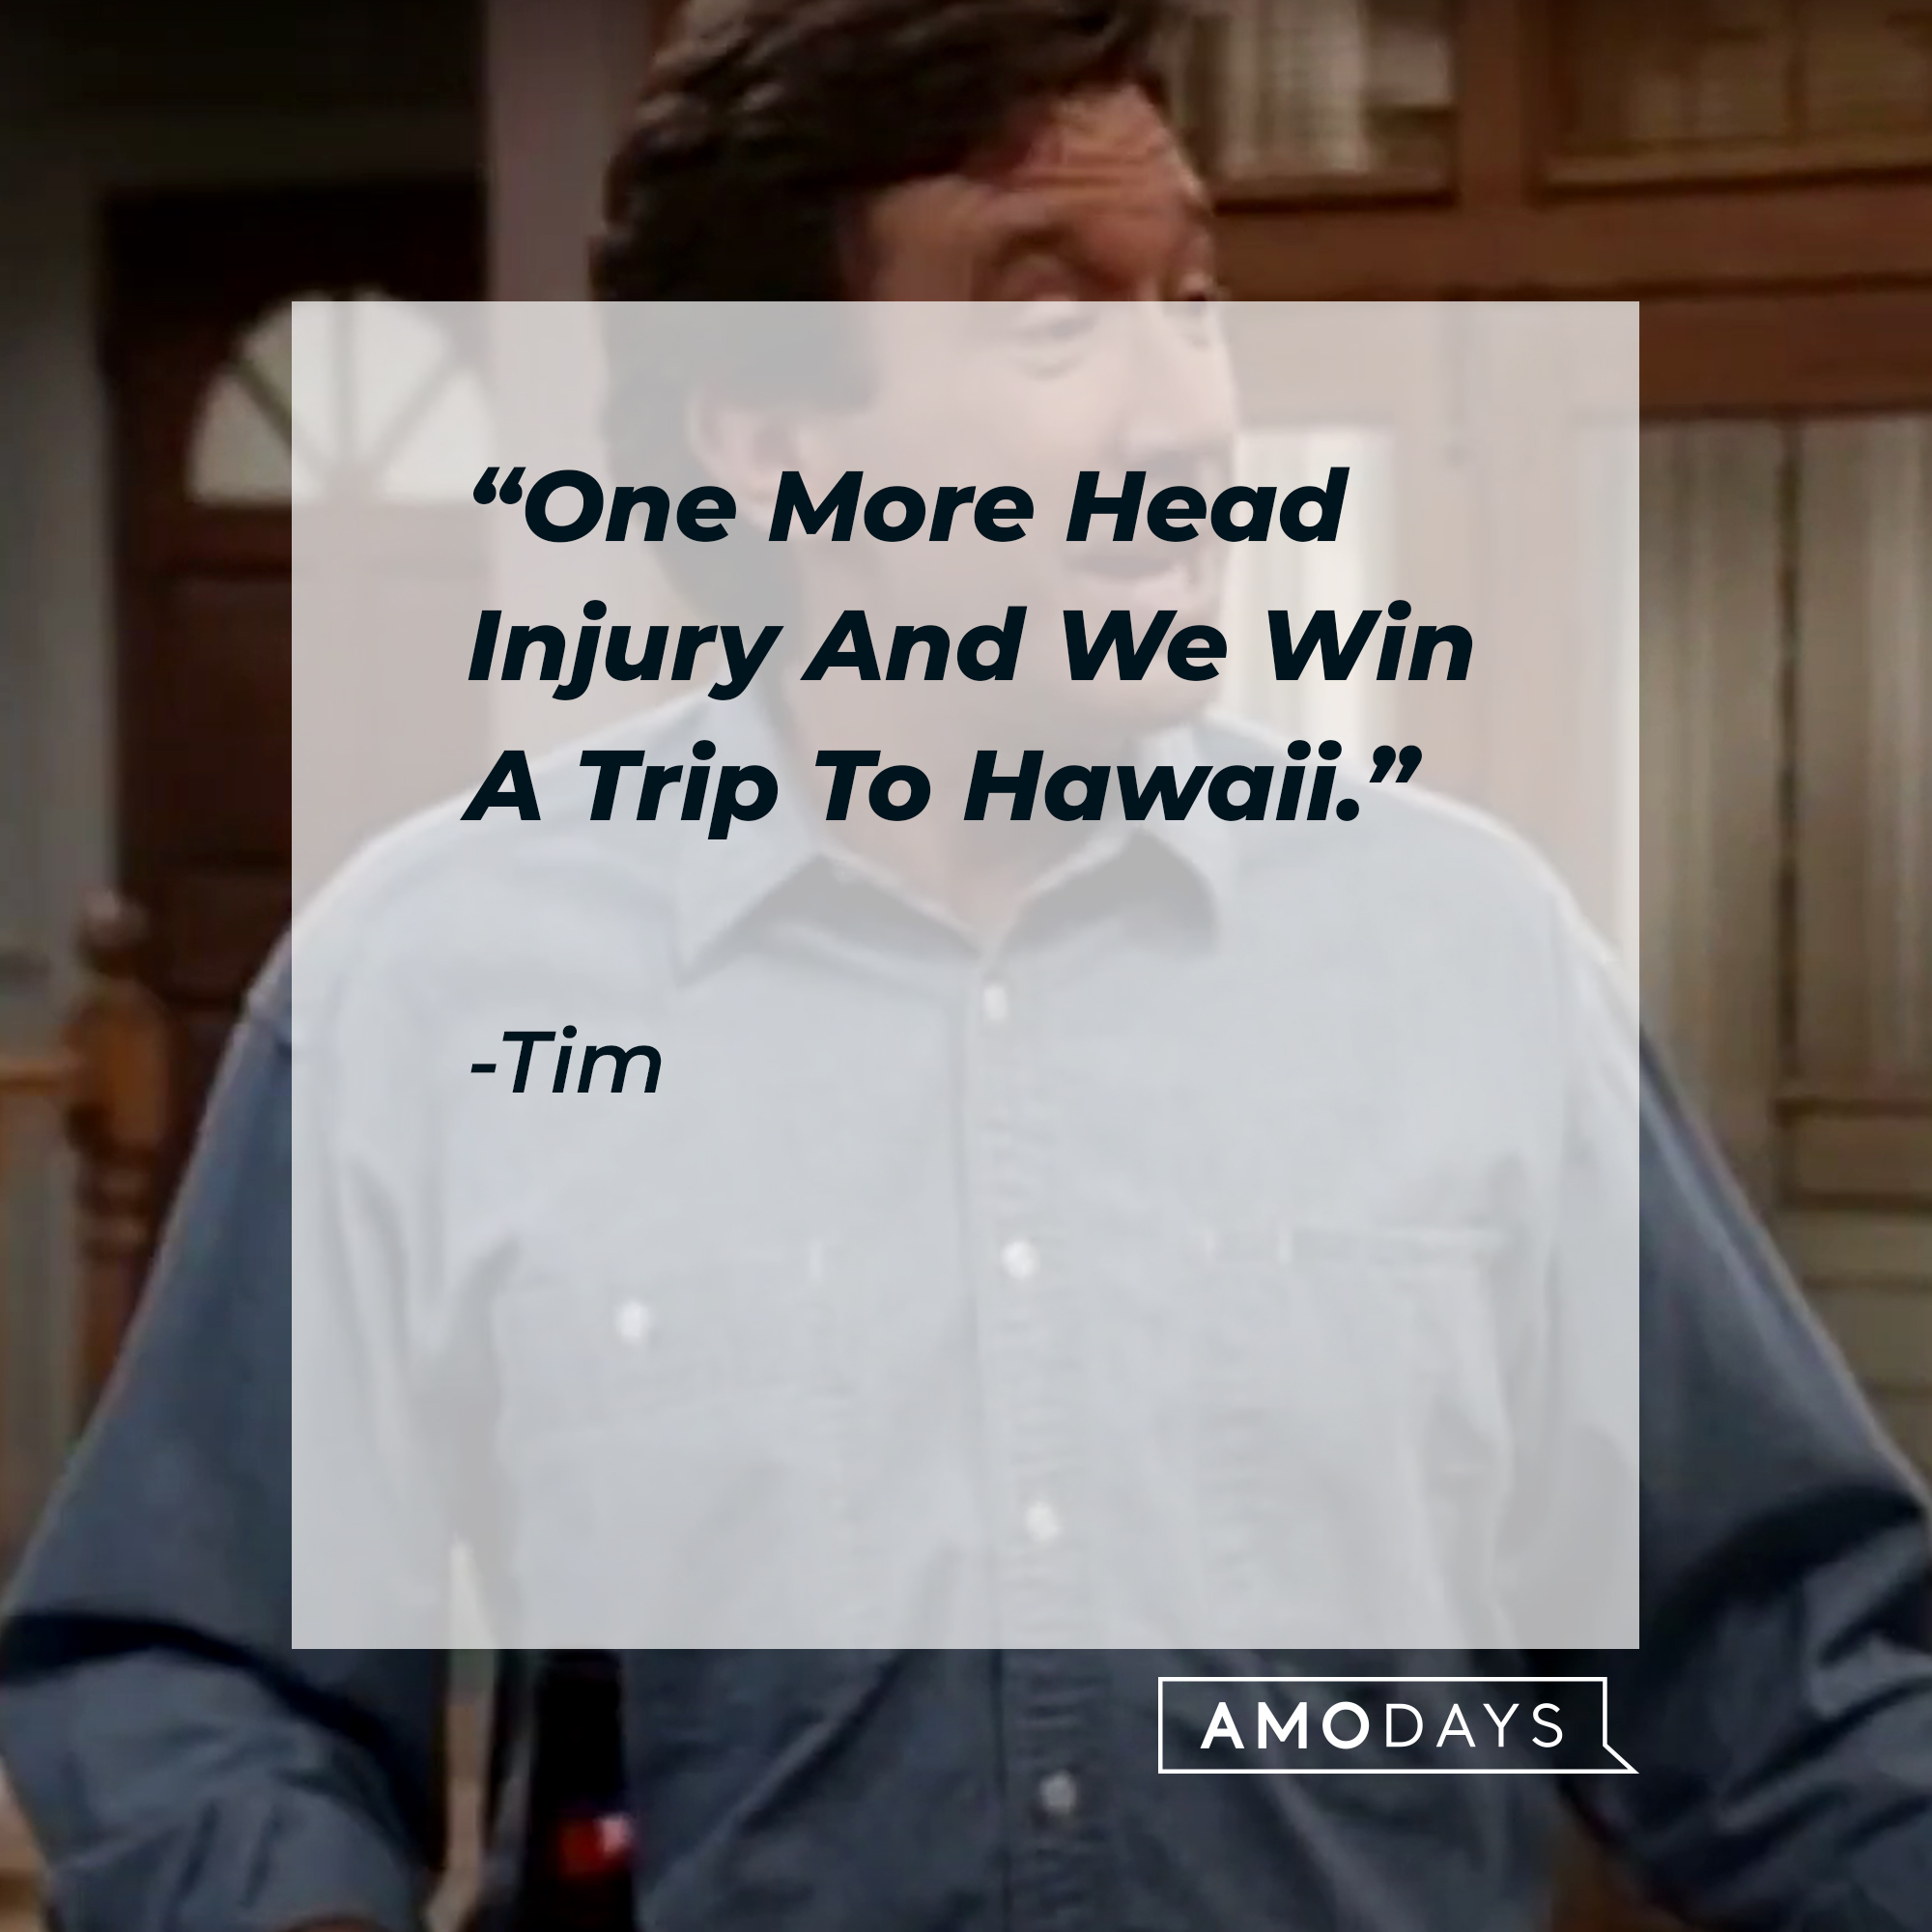 Tim's quote: “One More Head Injury And We Win A Trip To Hawaii.” | Source: youtube.com/ABCNetwork